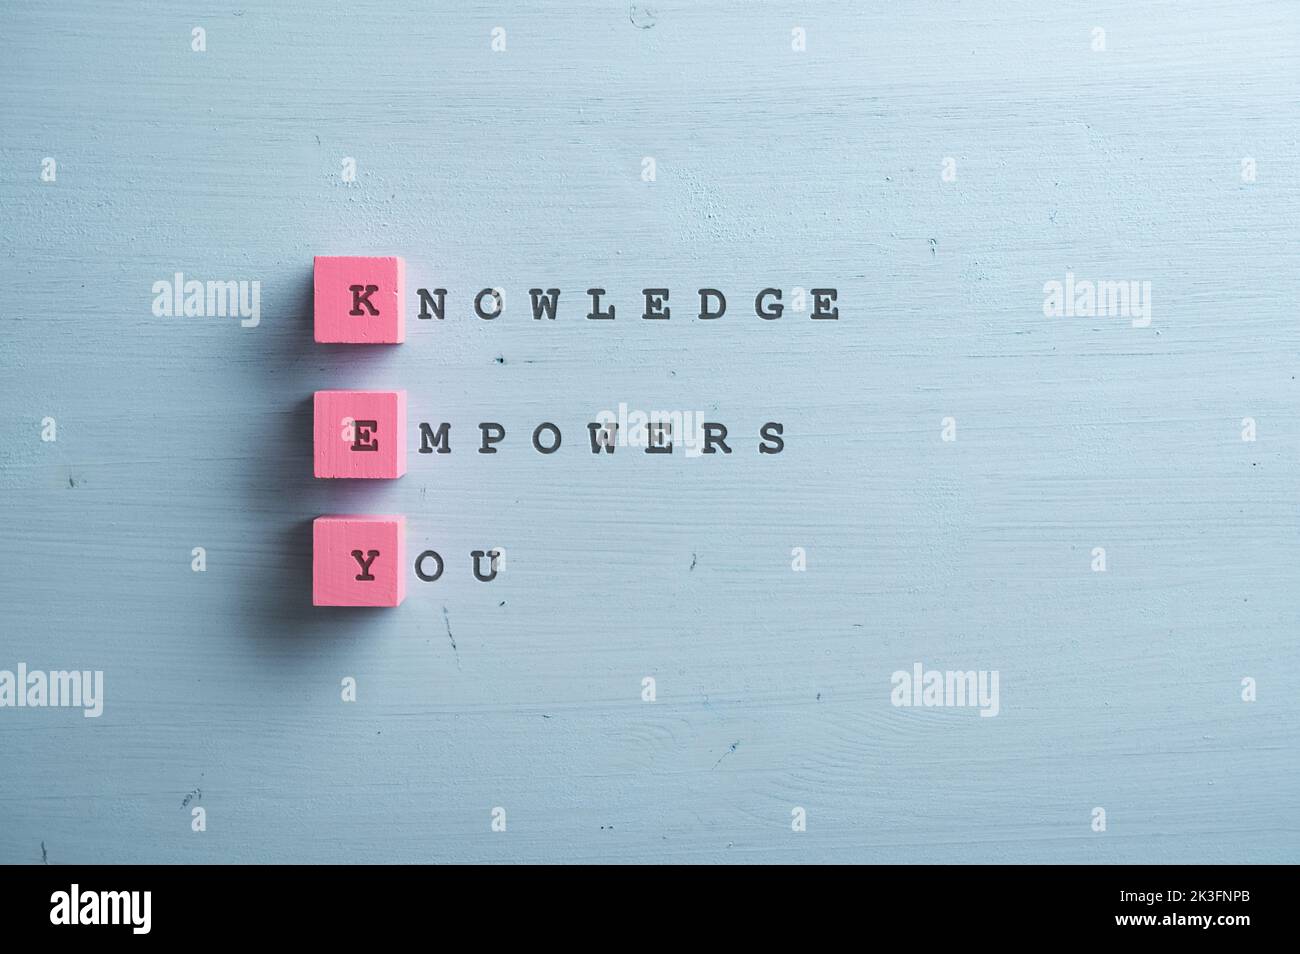 Knowledge empowers you sign written on pink wooden blocks and blue wooden backgorund. Stock Photo